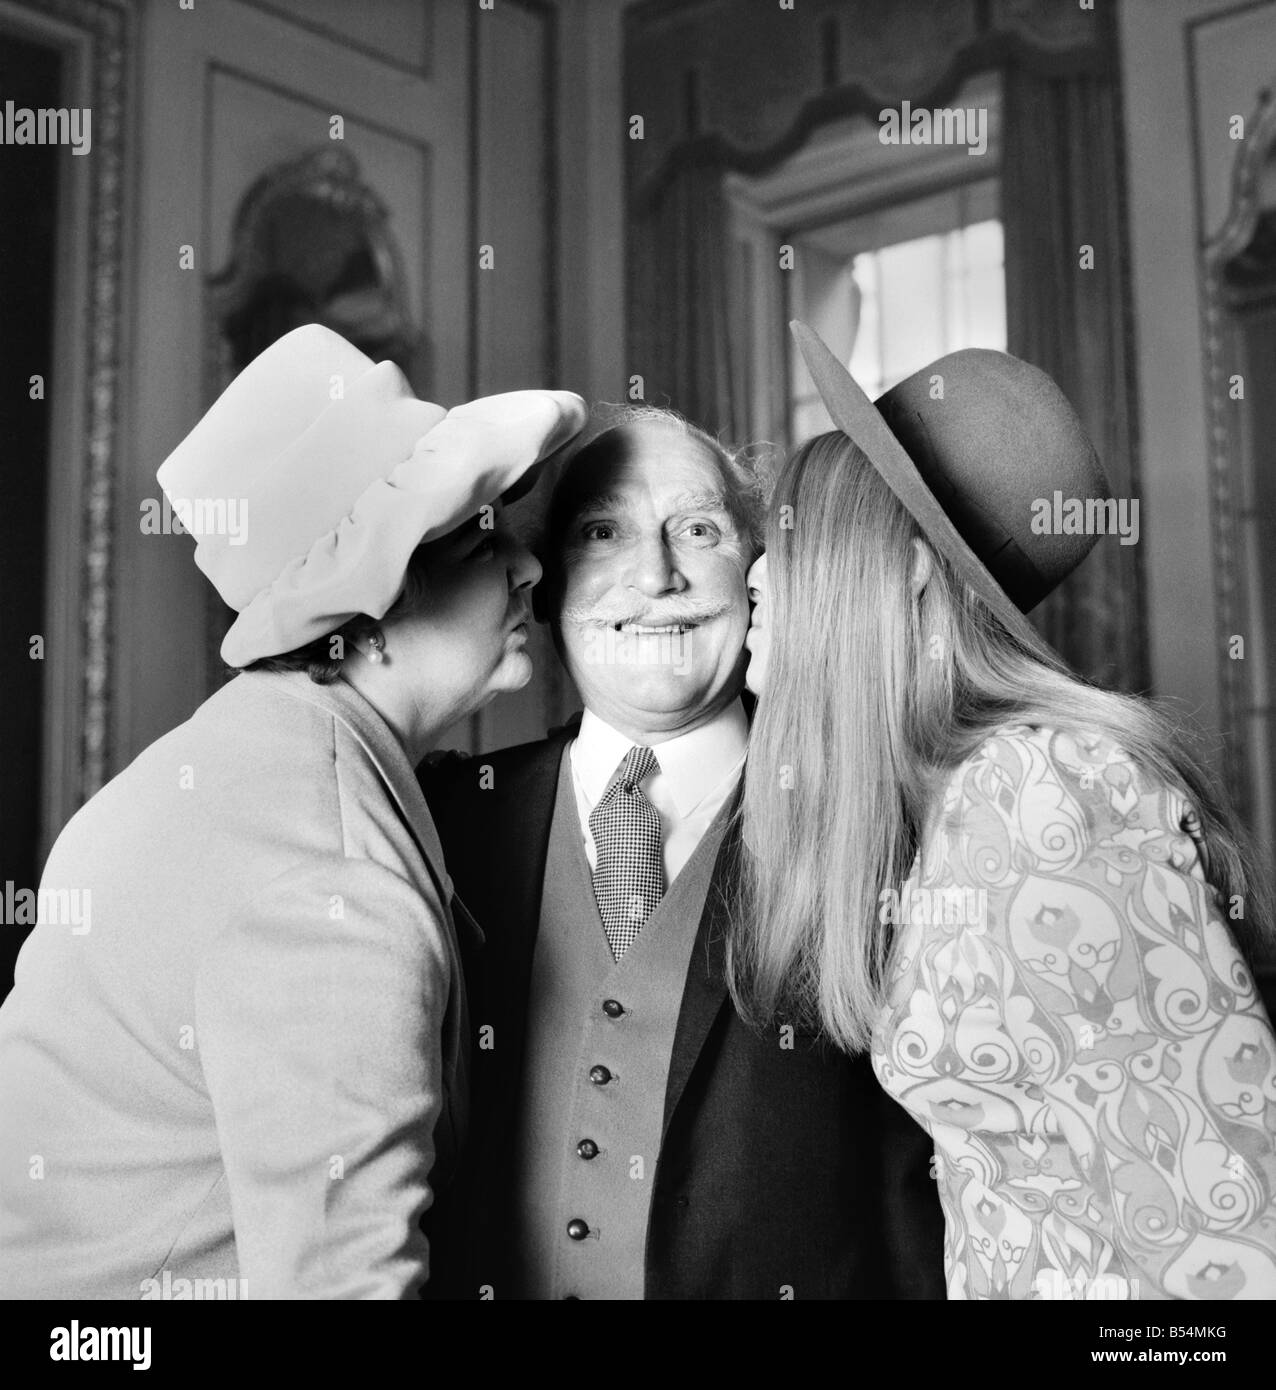 The Lord Mayor, Sir Ian Bowater today presented the Binney Memorial Awards for bravery by civilians, at the 'Goldsmiths' Hall in City of London. Mr. Trevelyan H. Cowling gets a kiss from his wife Kathleen on left and 21 year old daughter Elizabeth. December 1969 Z11552-001 Stock Photo